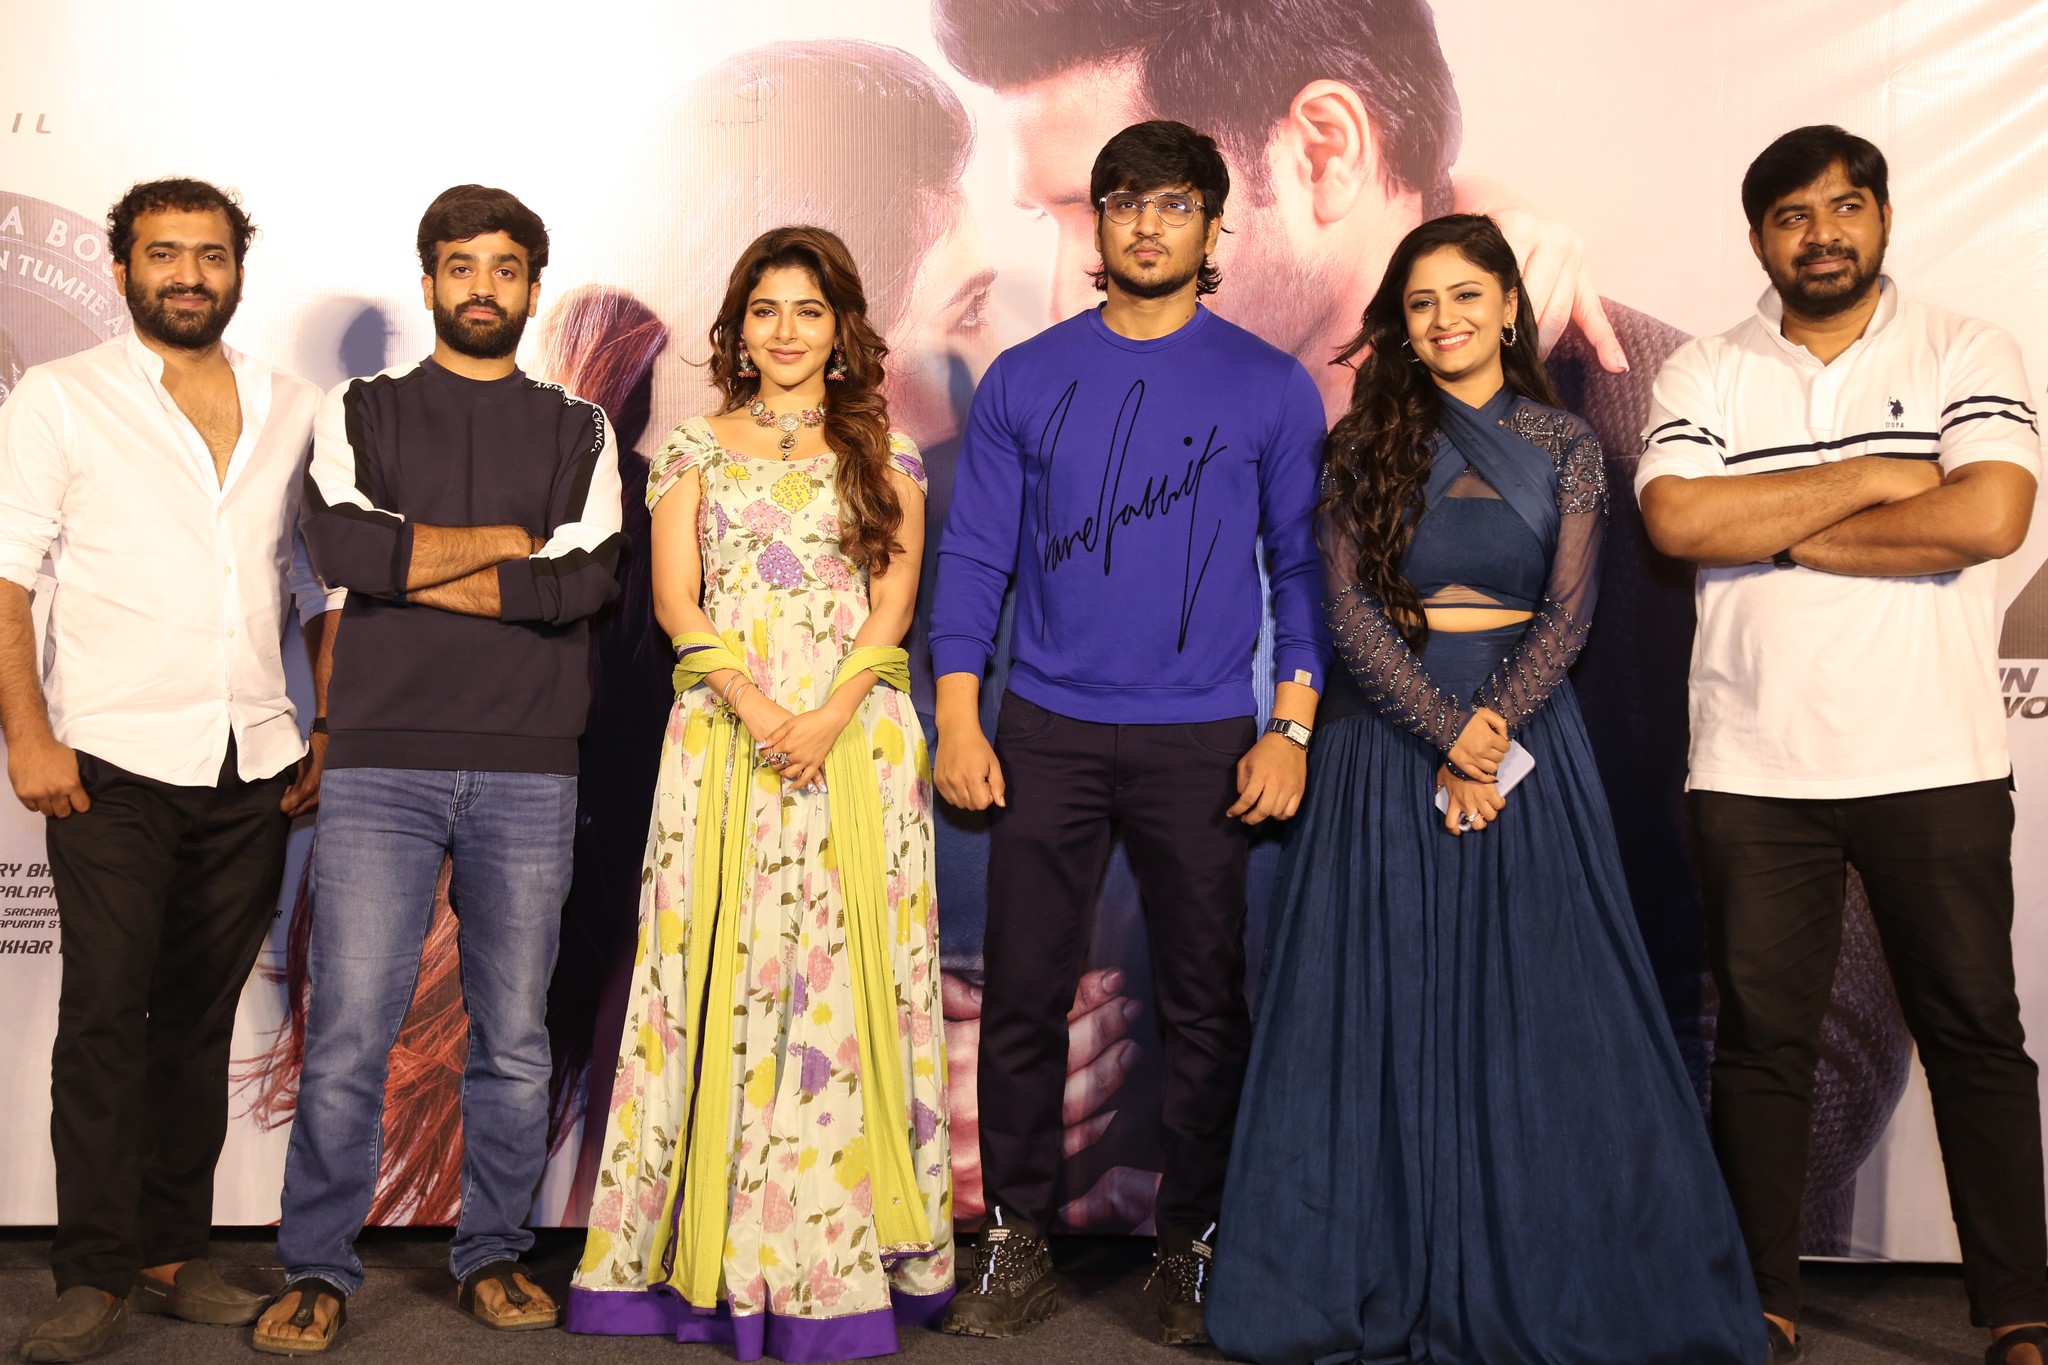 Spy Movie Theatrical Trailer Launched - rspnetwork.in